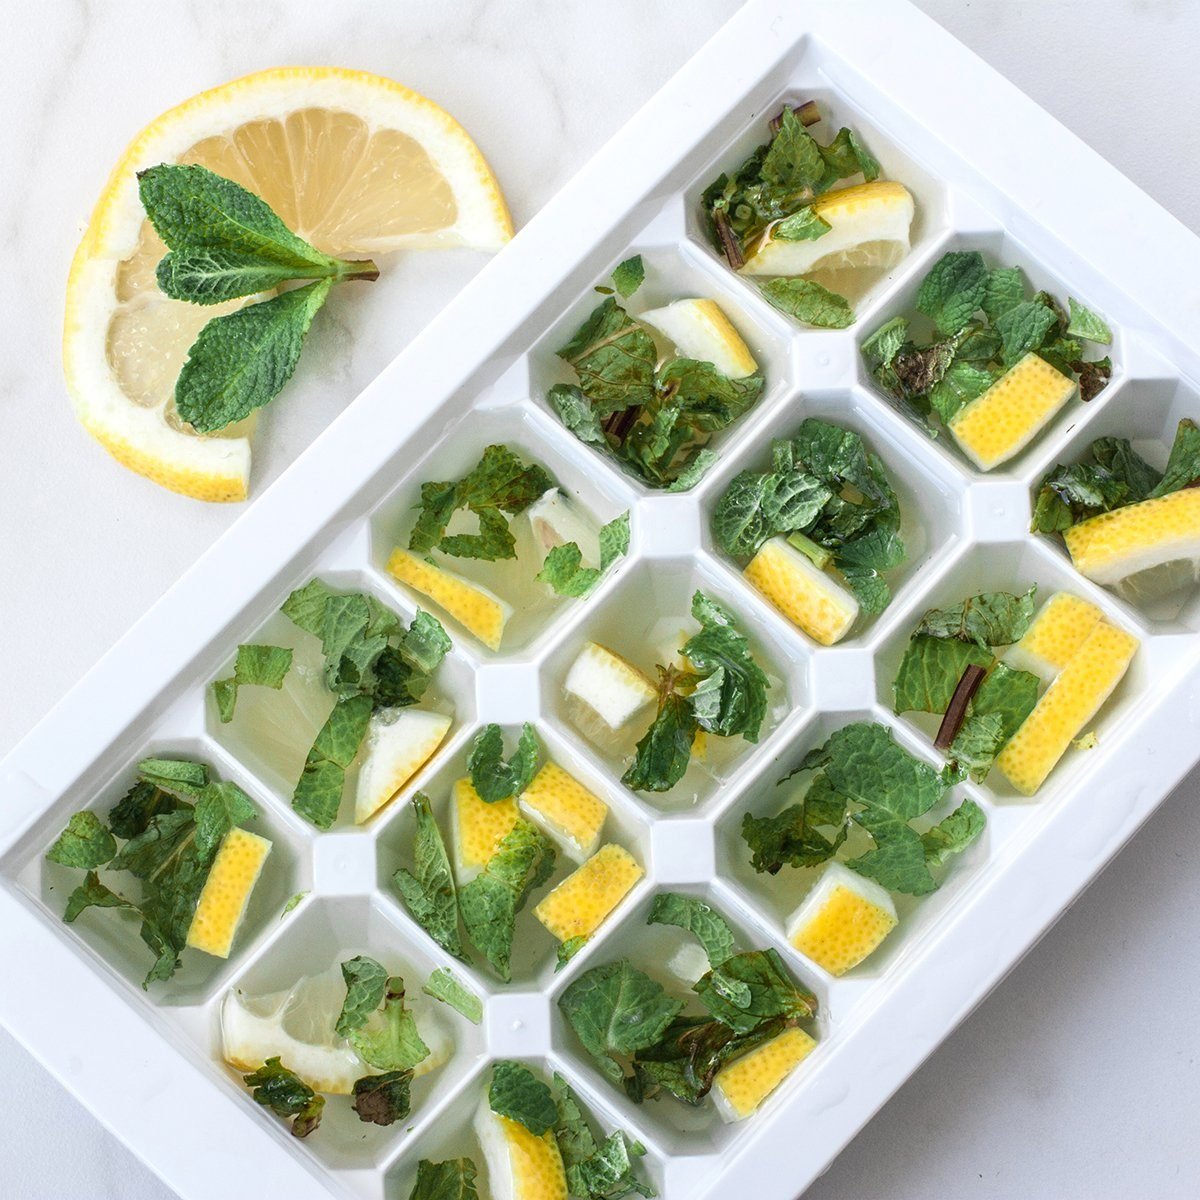 Cooking ice cubes with lemon and mint on marble background.